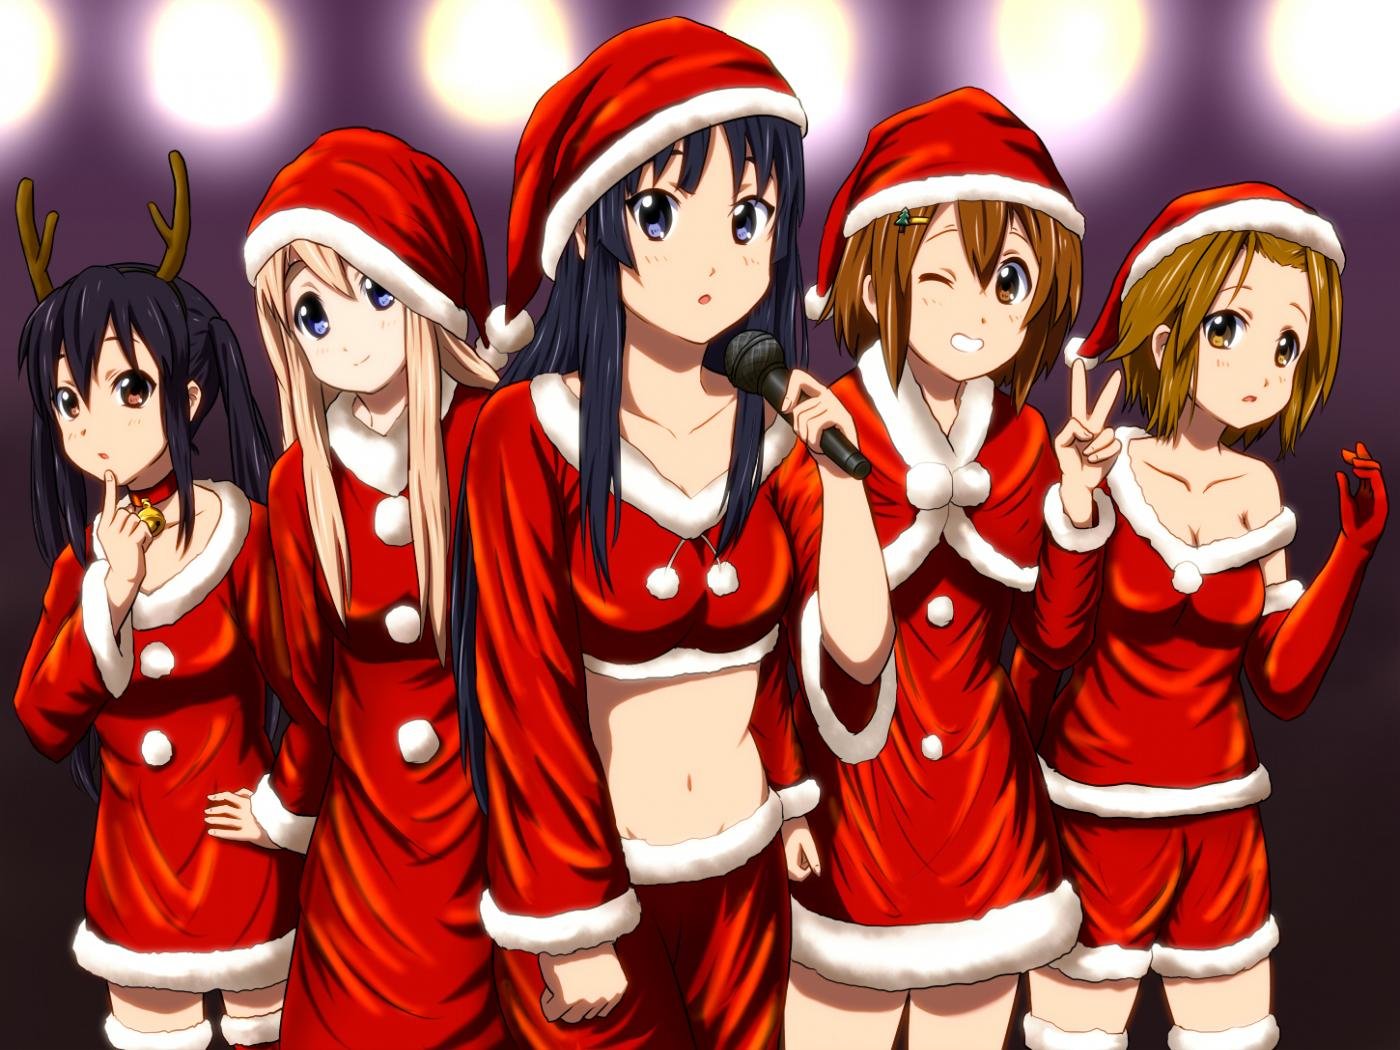 Christmas Anime wallpapers HD for desktop backgrounds